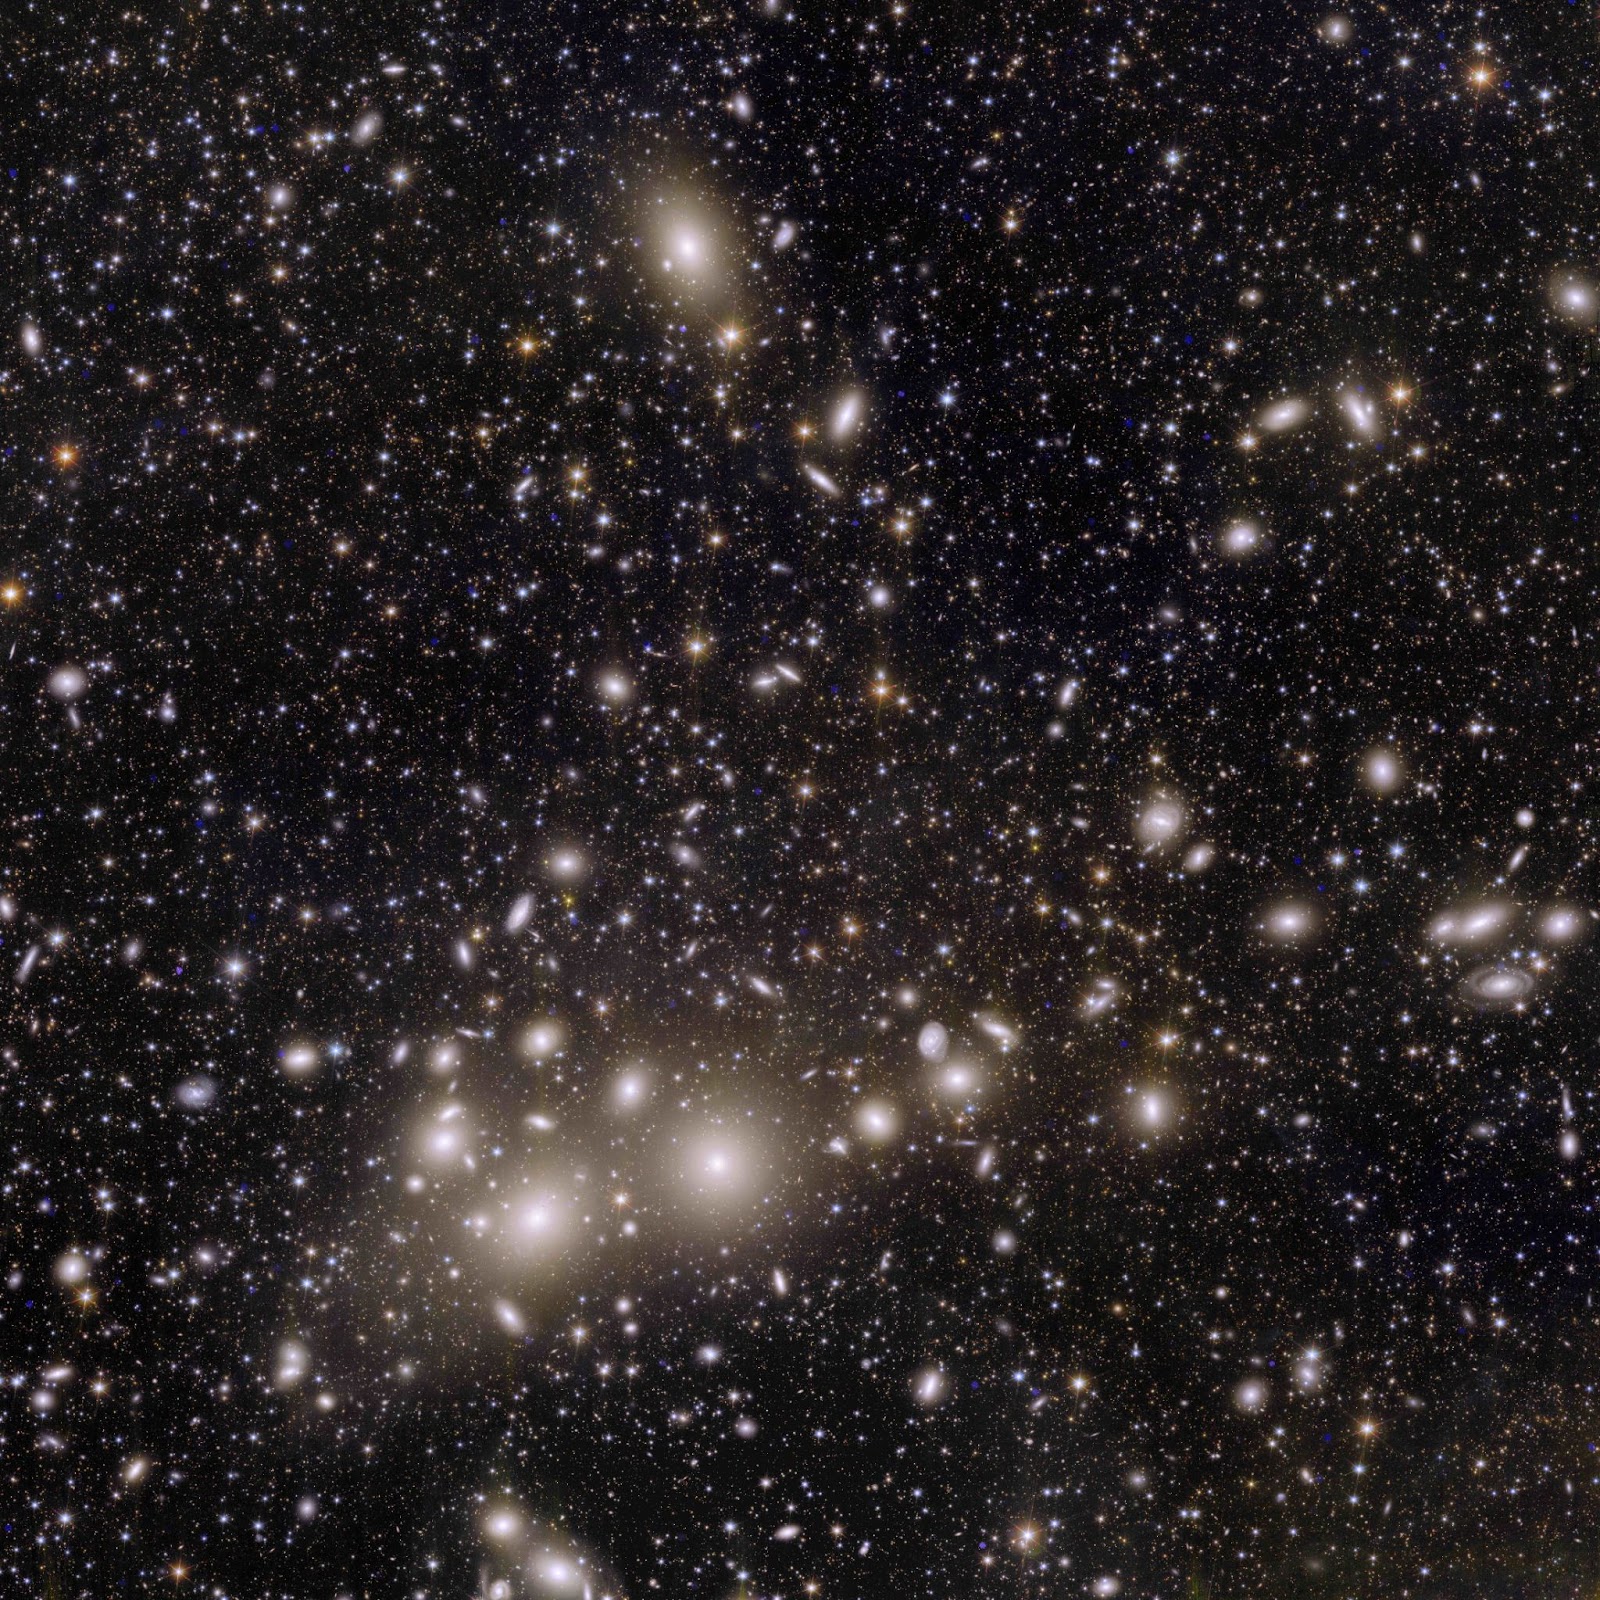 A cluster of galaxies in the night sky.